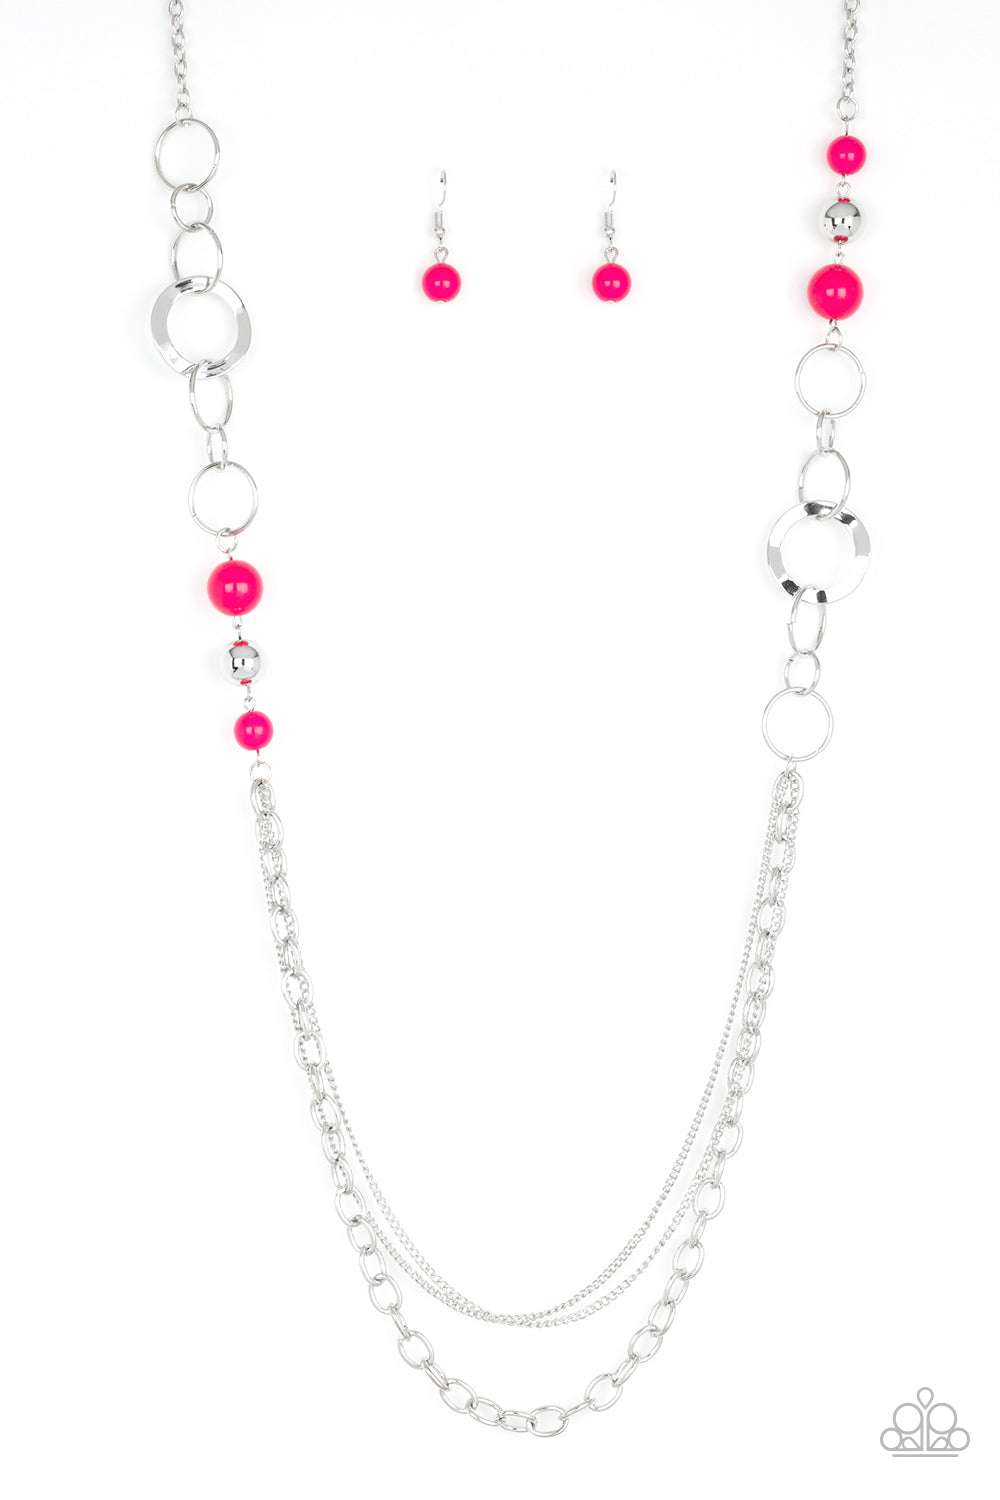 Modern Motley - Pink and Silver Necklace - Paparazzi Accessories - Vivacious pink beads, shiny silver beads, and glistening silver hoops give way to mismatched silver chains for a whimsical look. Features an adjustable clasp closure. Sold as one individual necklace.